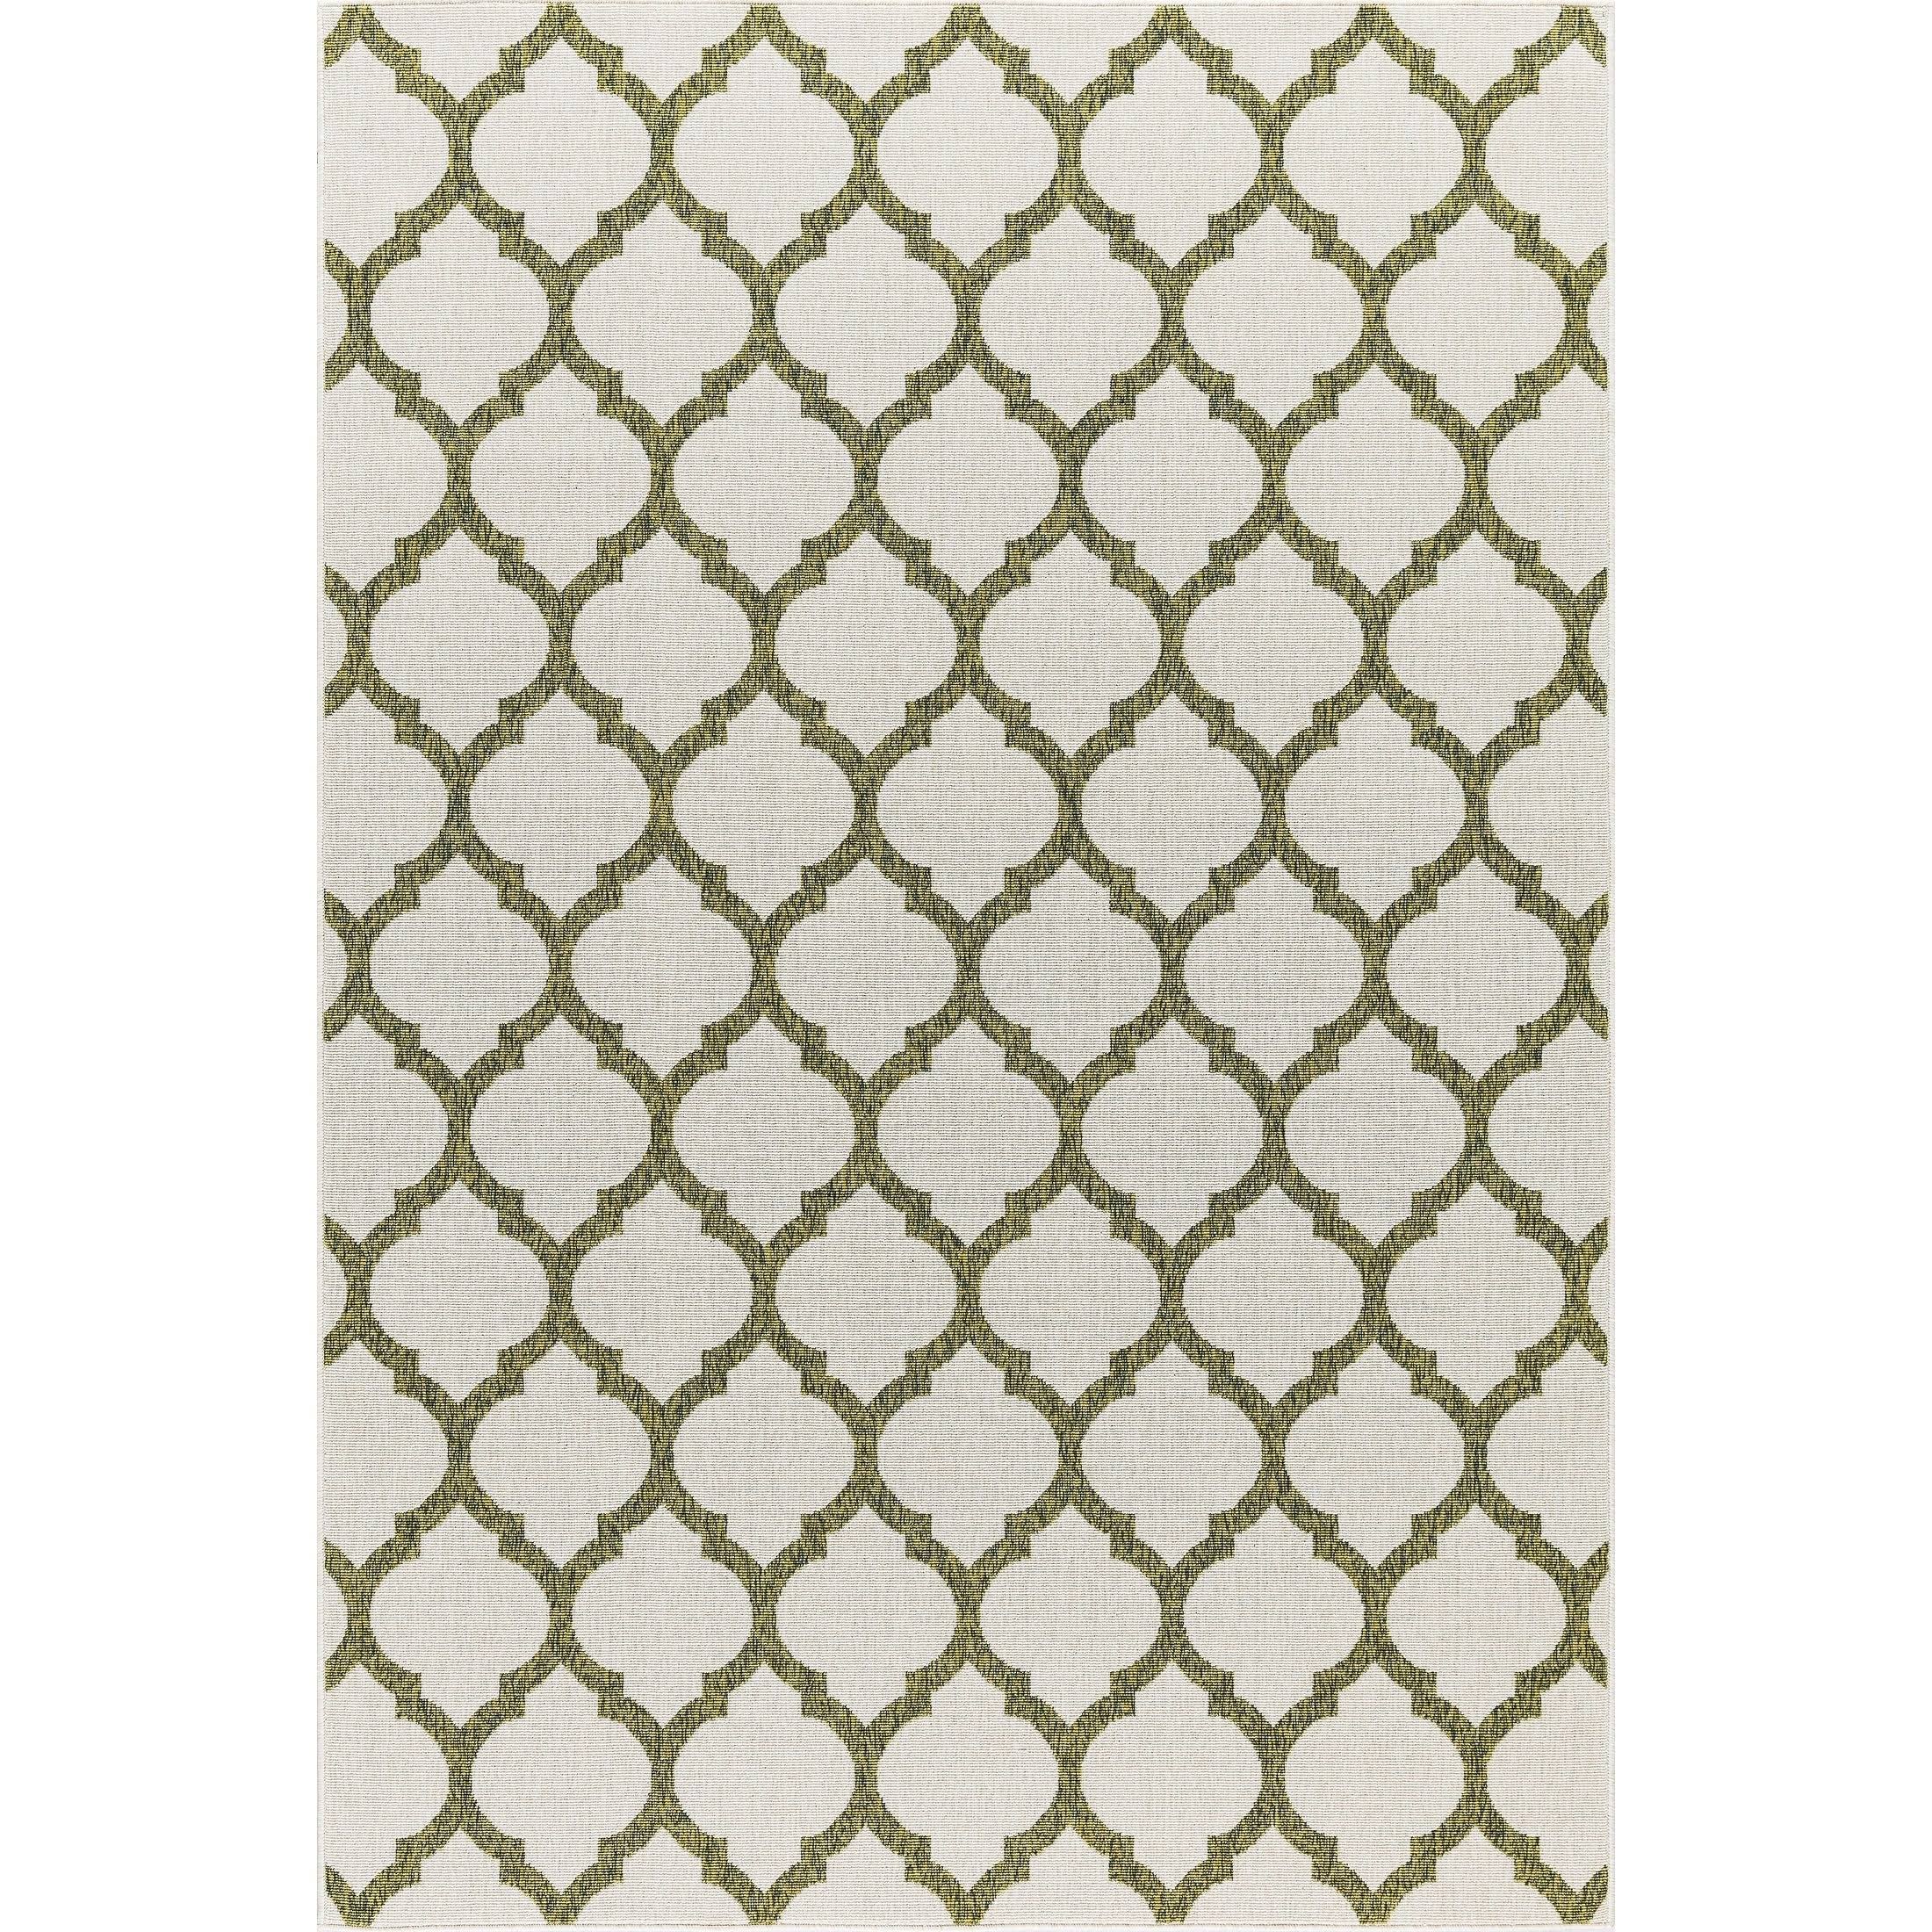 Details about   Anne High Quality Indoor Outdoor Area Rug Trellis Pattern Beige Green 